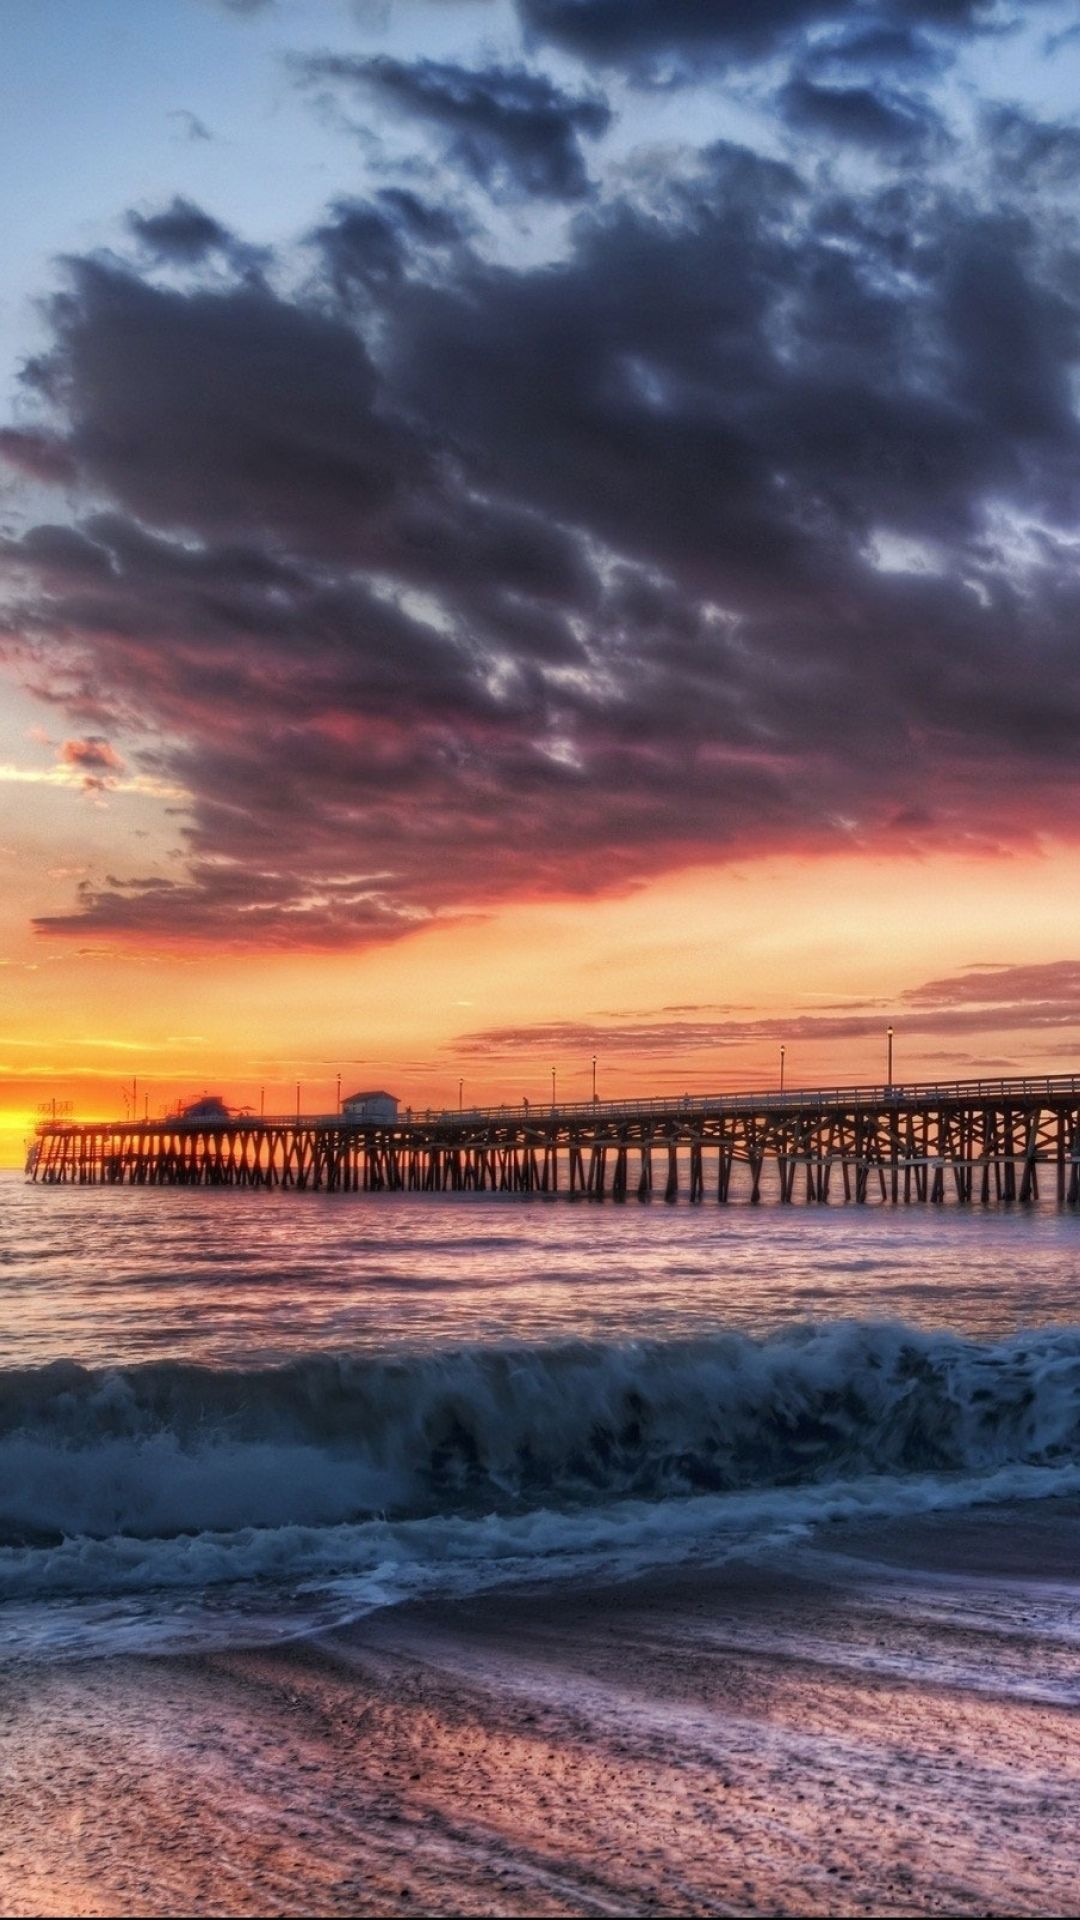 California Beach Dock Sunset Android Wallpaper free download